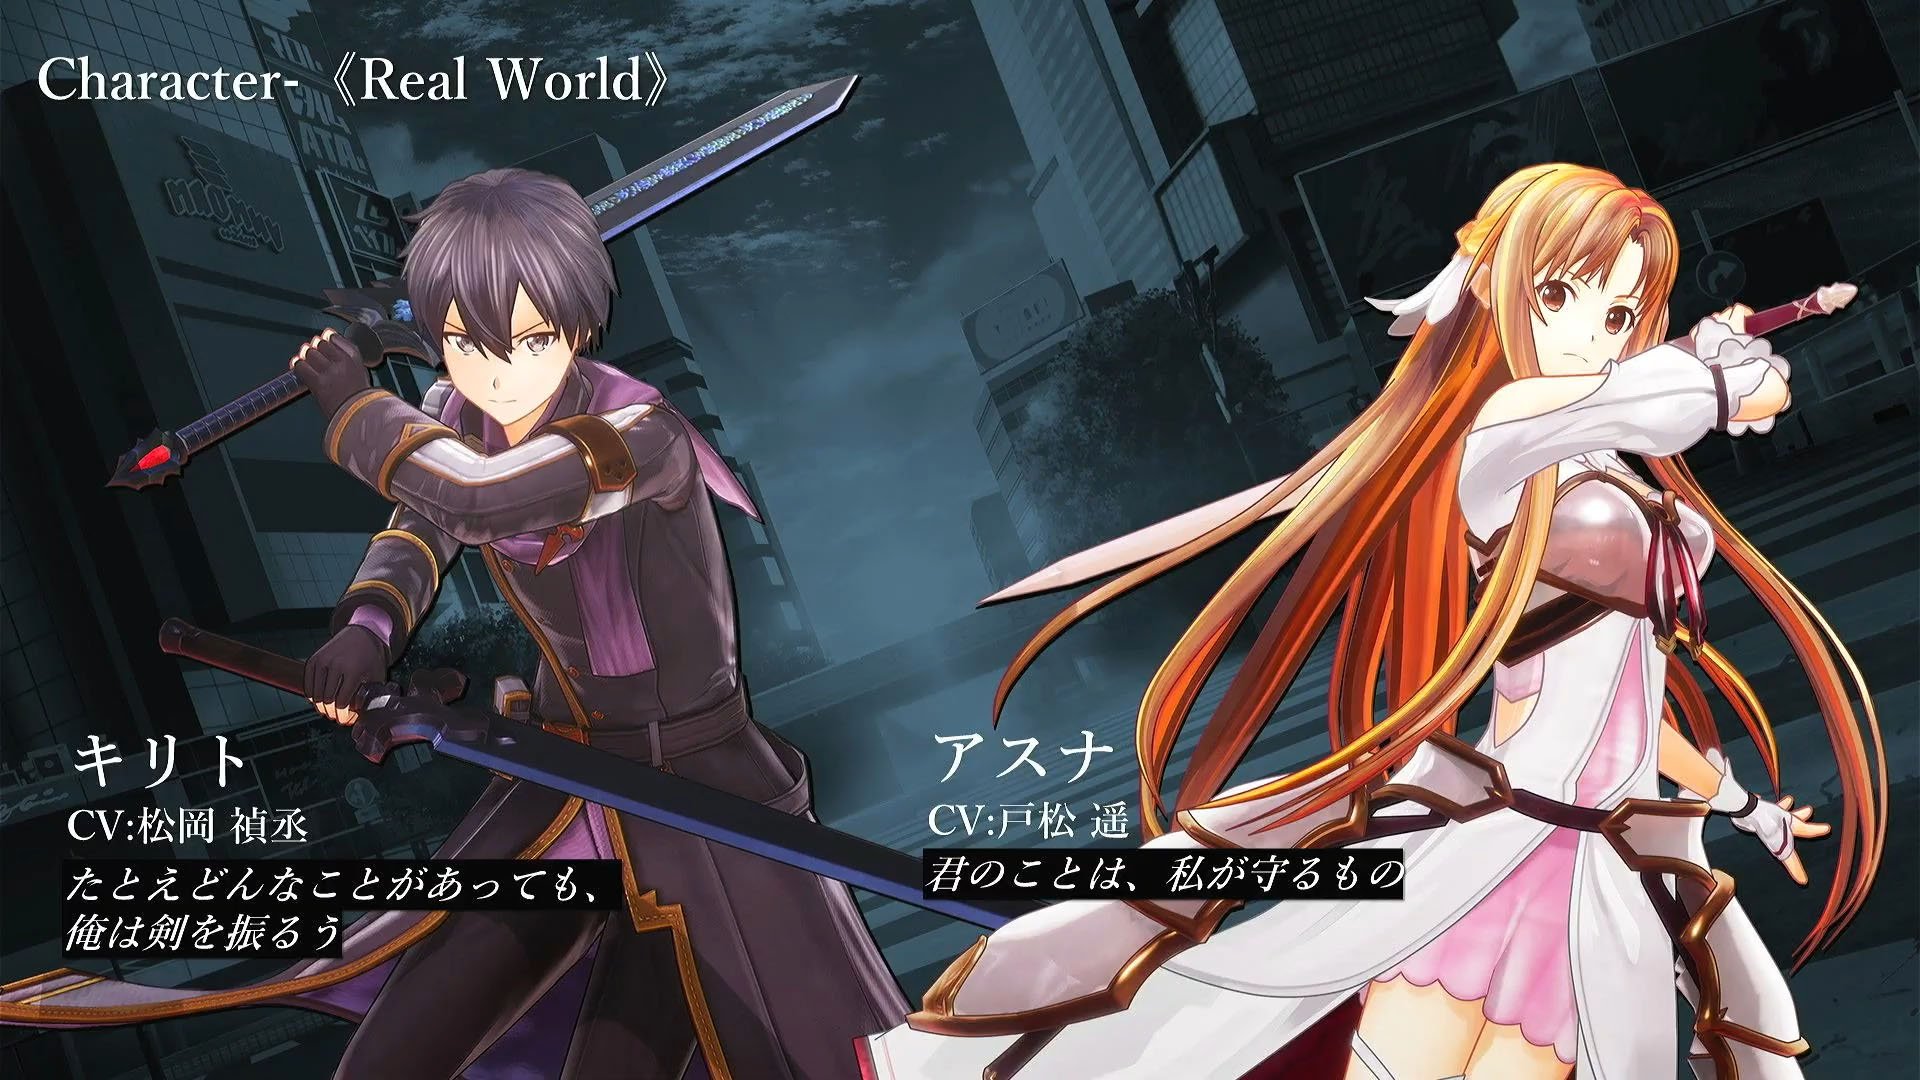 Sword Art Online Last Recollection trophies revealed for PS5 RPG